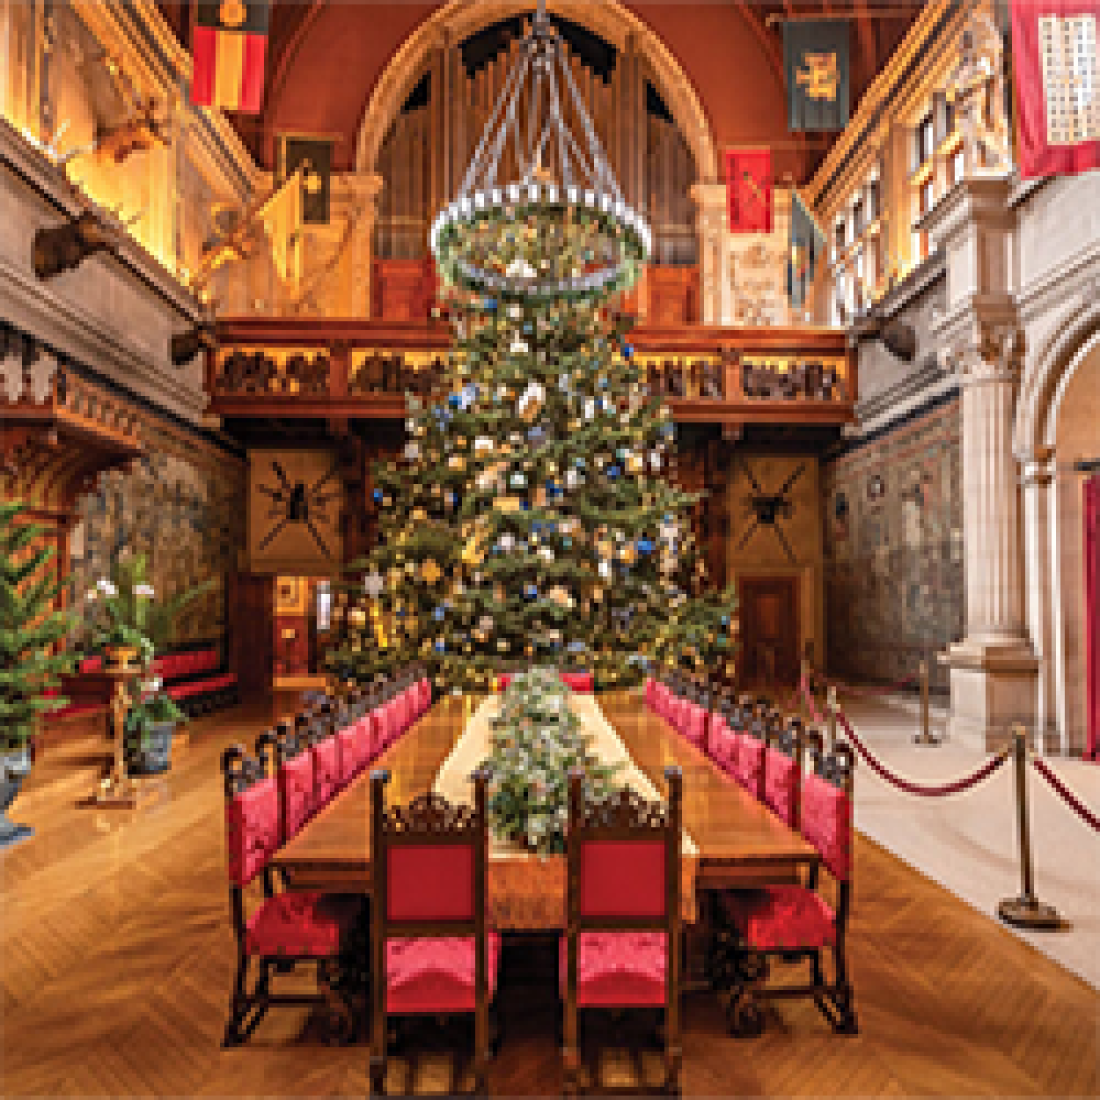 Interior view of banquet table and seating with Christmas décor inside the Biltmore Estate.